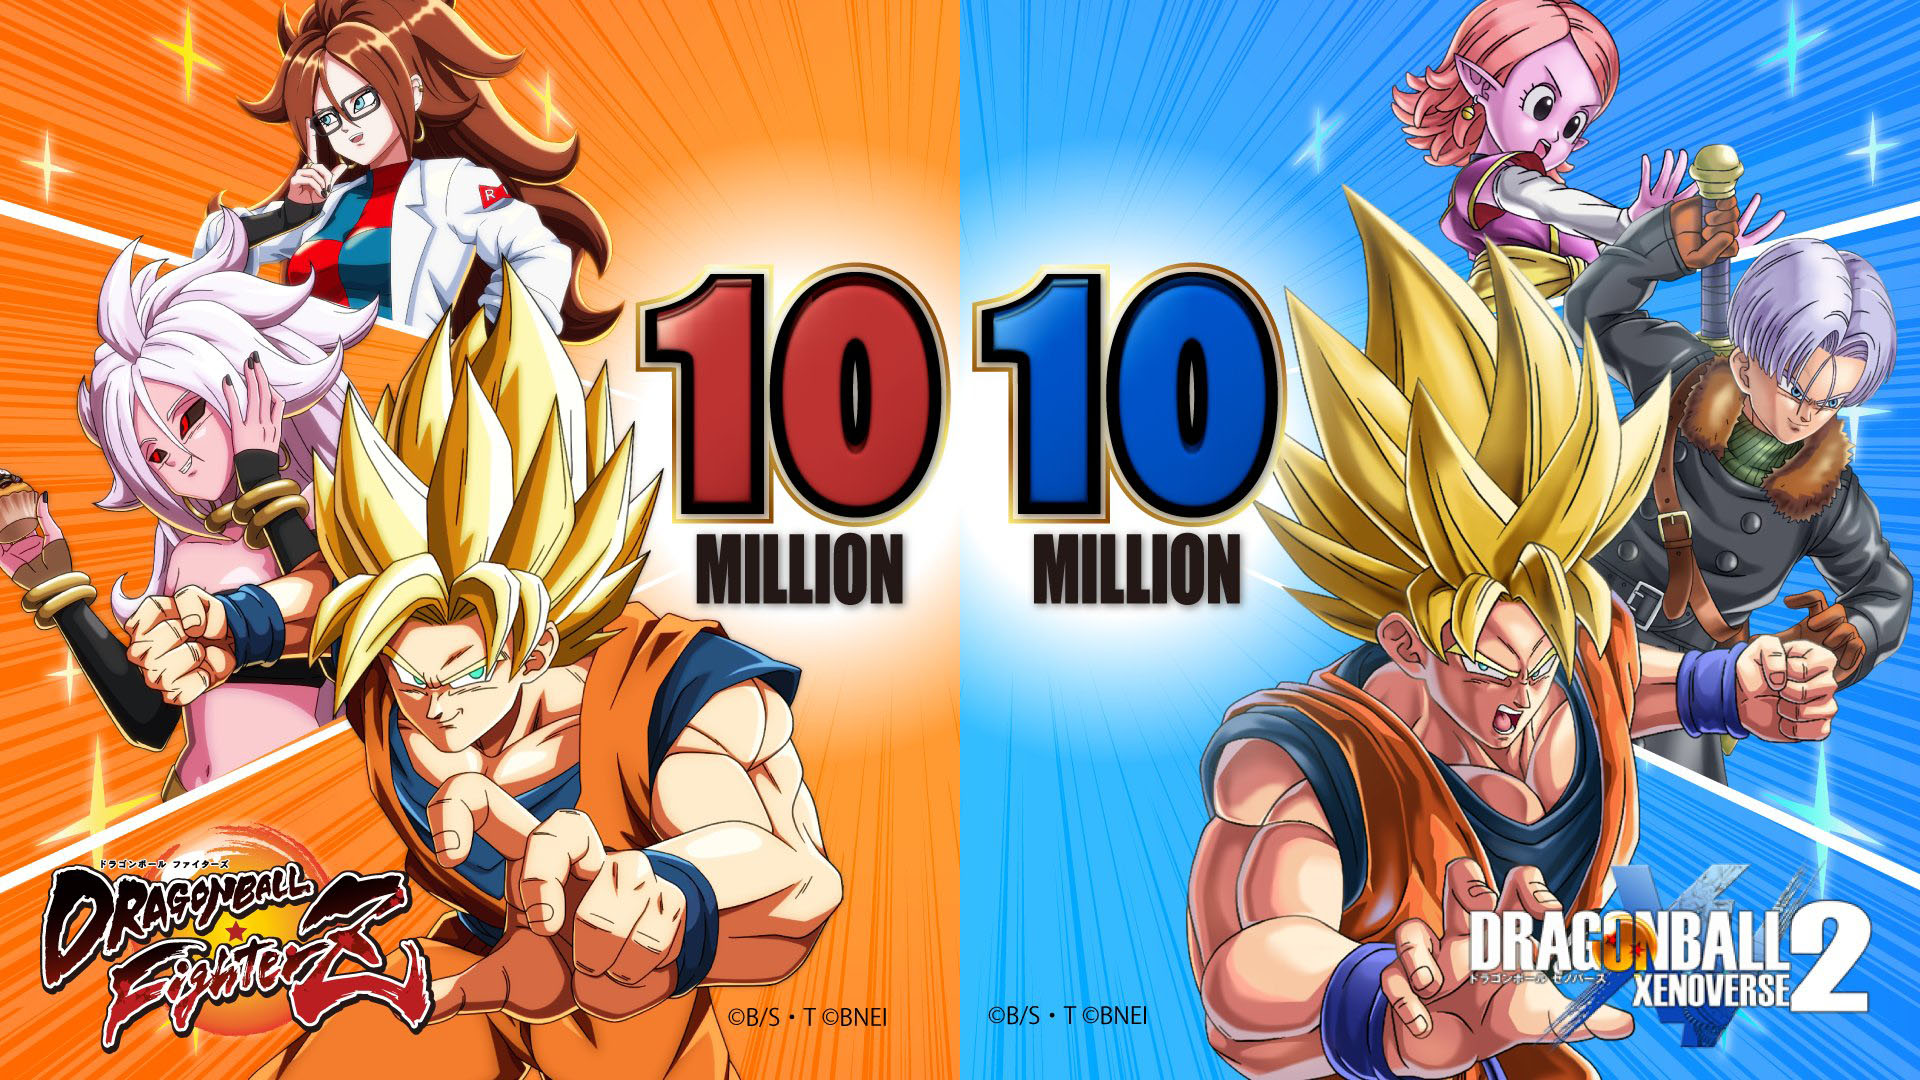 Dragon Ball FighterZ and Dragon Ball Xenoverse 2 both top 10 million copies